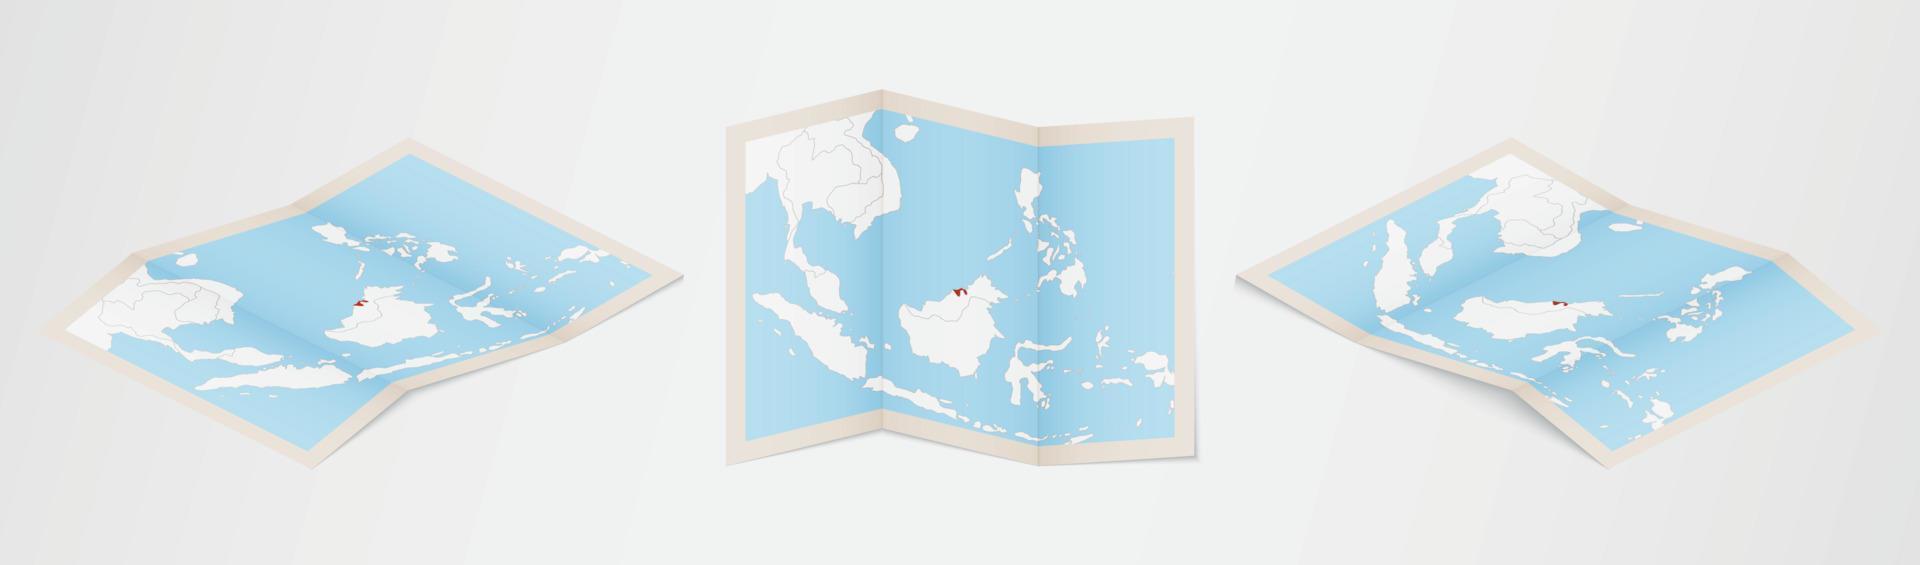 Folded map of Brunei in three different versions. vector